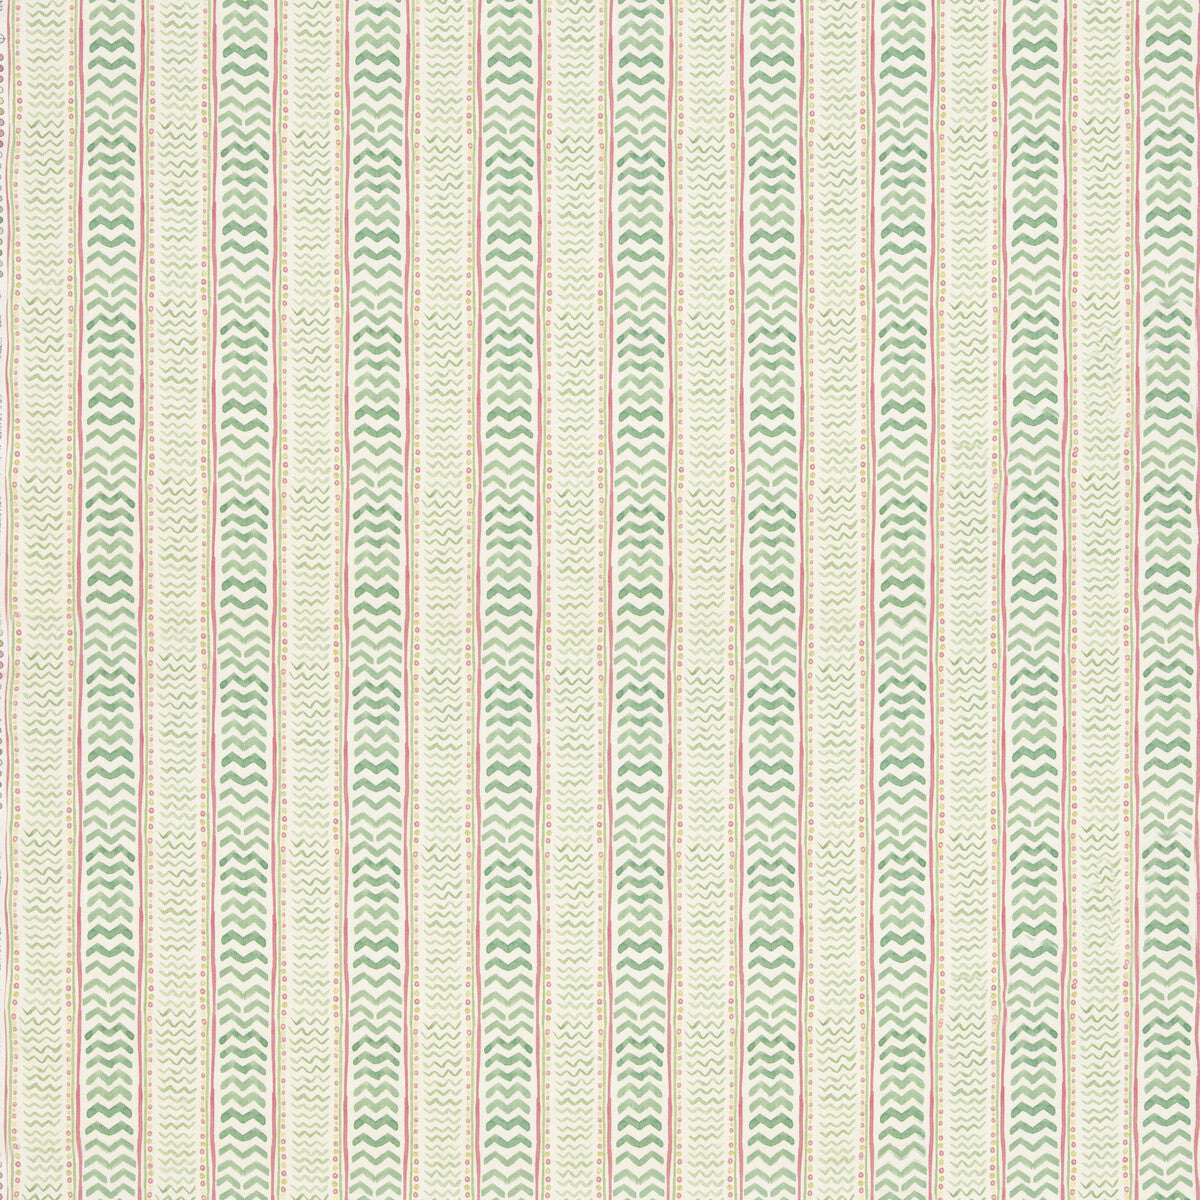 Wriggle Room fabric in green/pink color - pattern BP11050.3.0 - by G P &amp; J Baker in the X Kit Kemp Prints And Embroideries collection